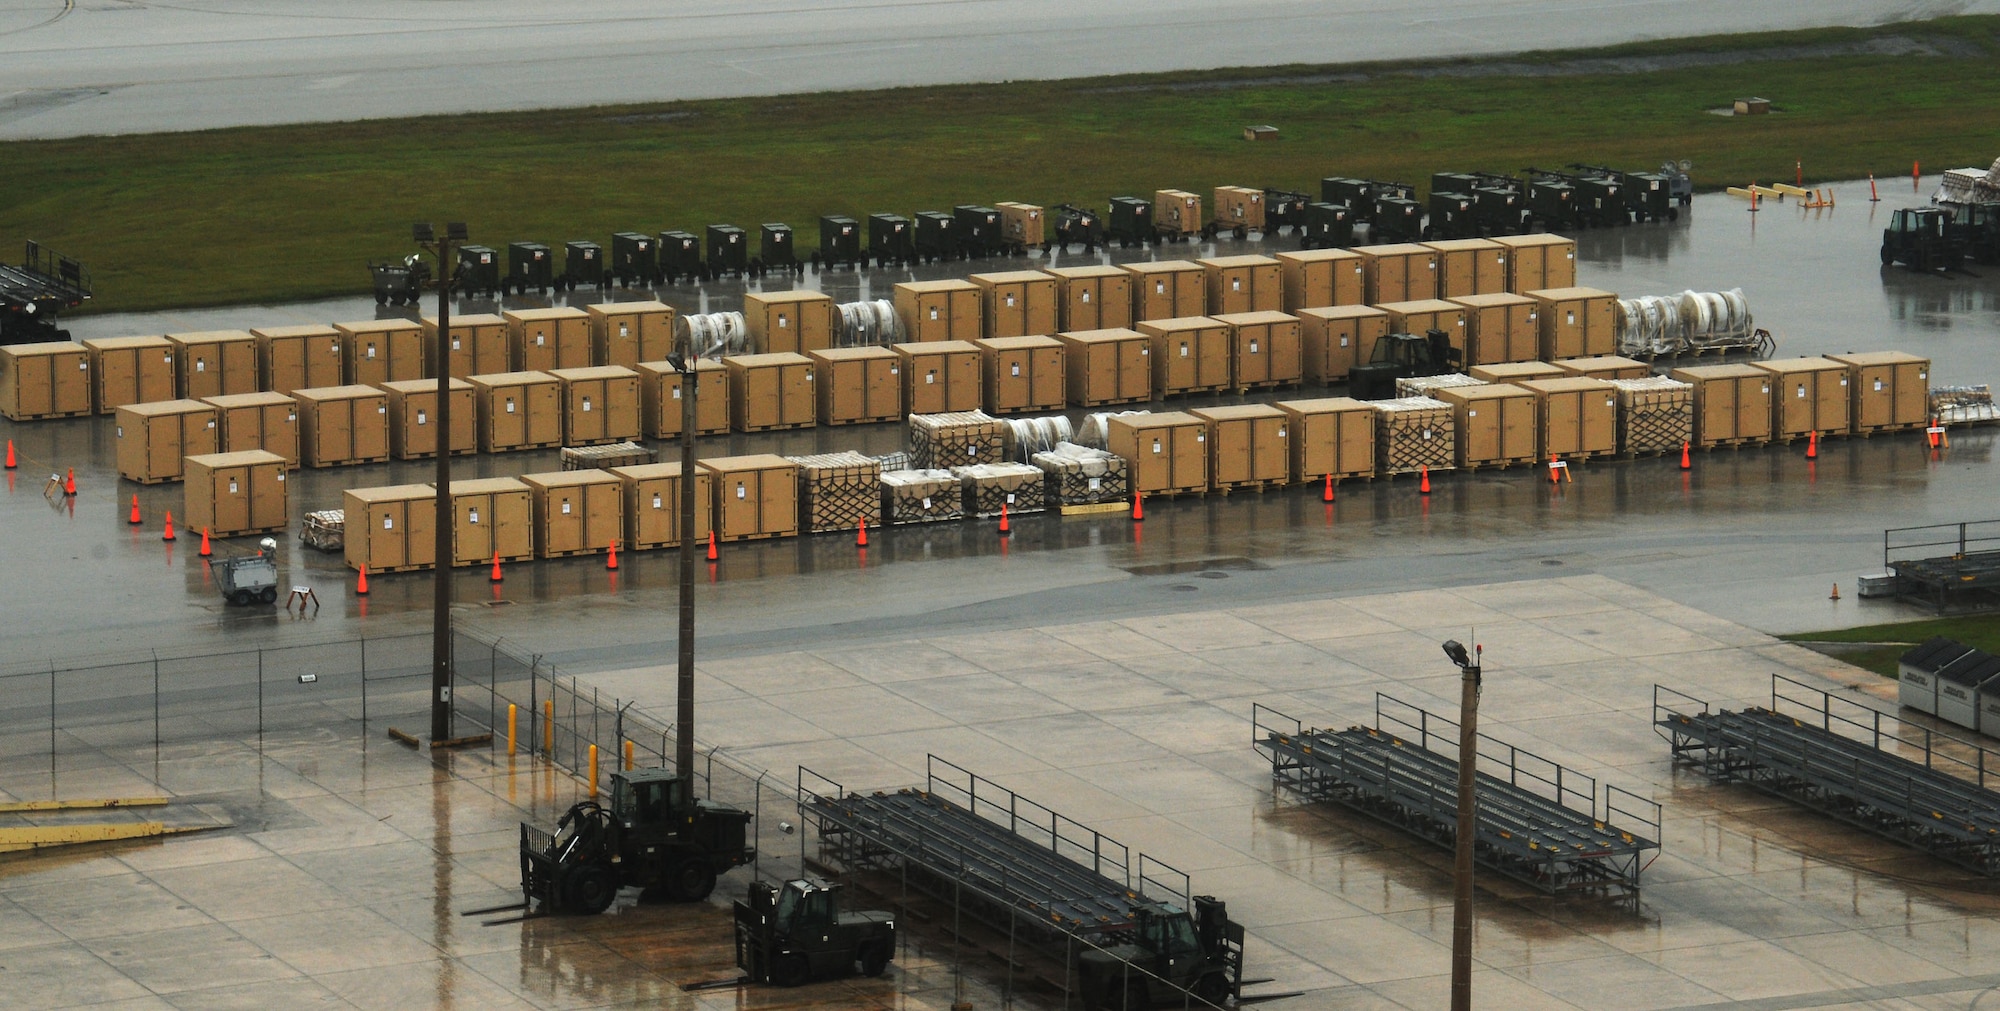 ANDERSEN AIR FORCE BASE, Guam - Cargo deployment chalks sit on the flightline here Dec. 10 awaiting simulated air transportation in support of Exercise Beverly Palm 09-10. (U.S. Air Force photo by Airman 1st Class Julian North)